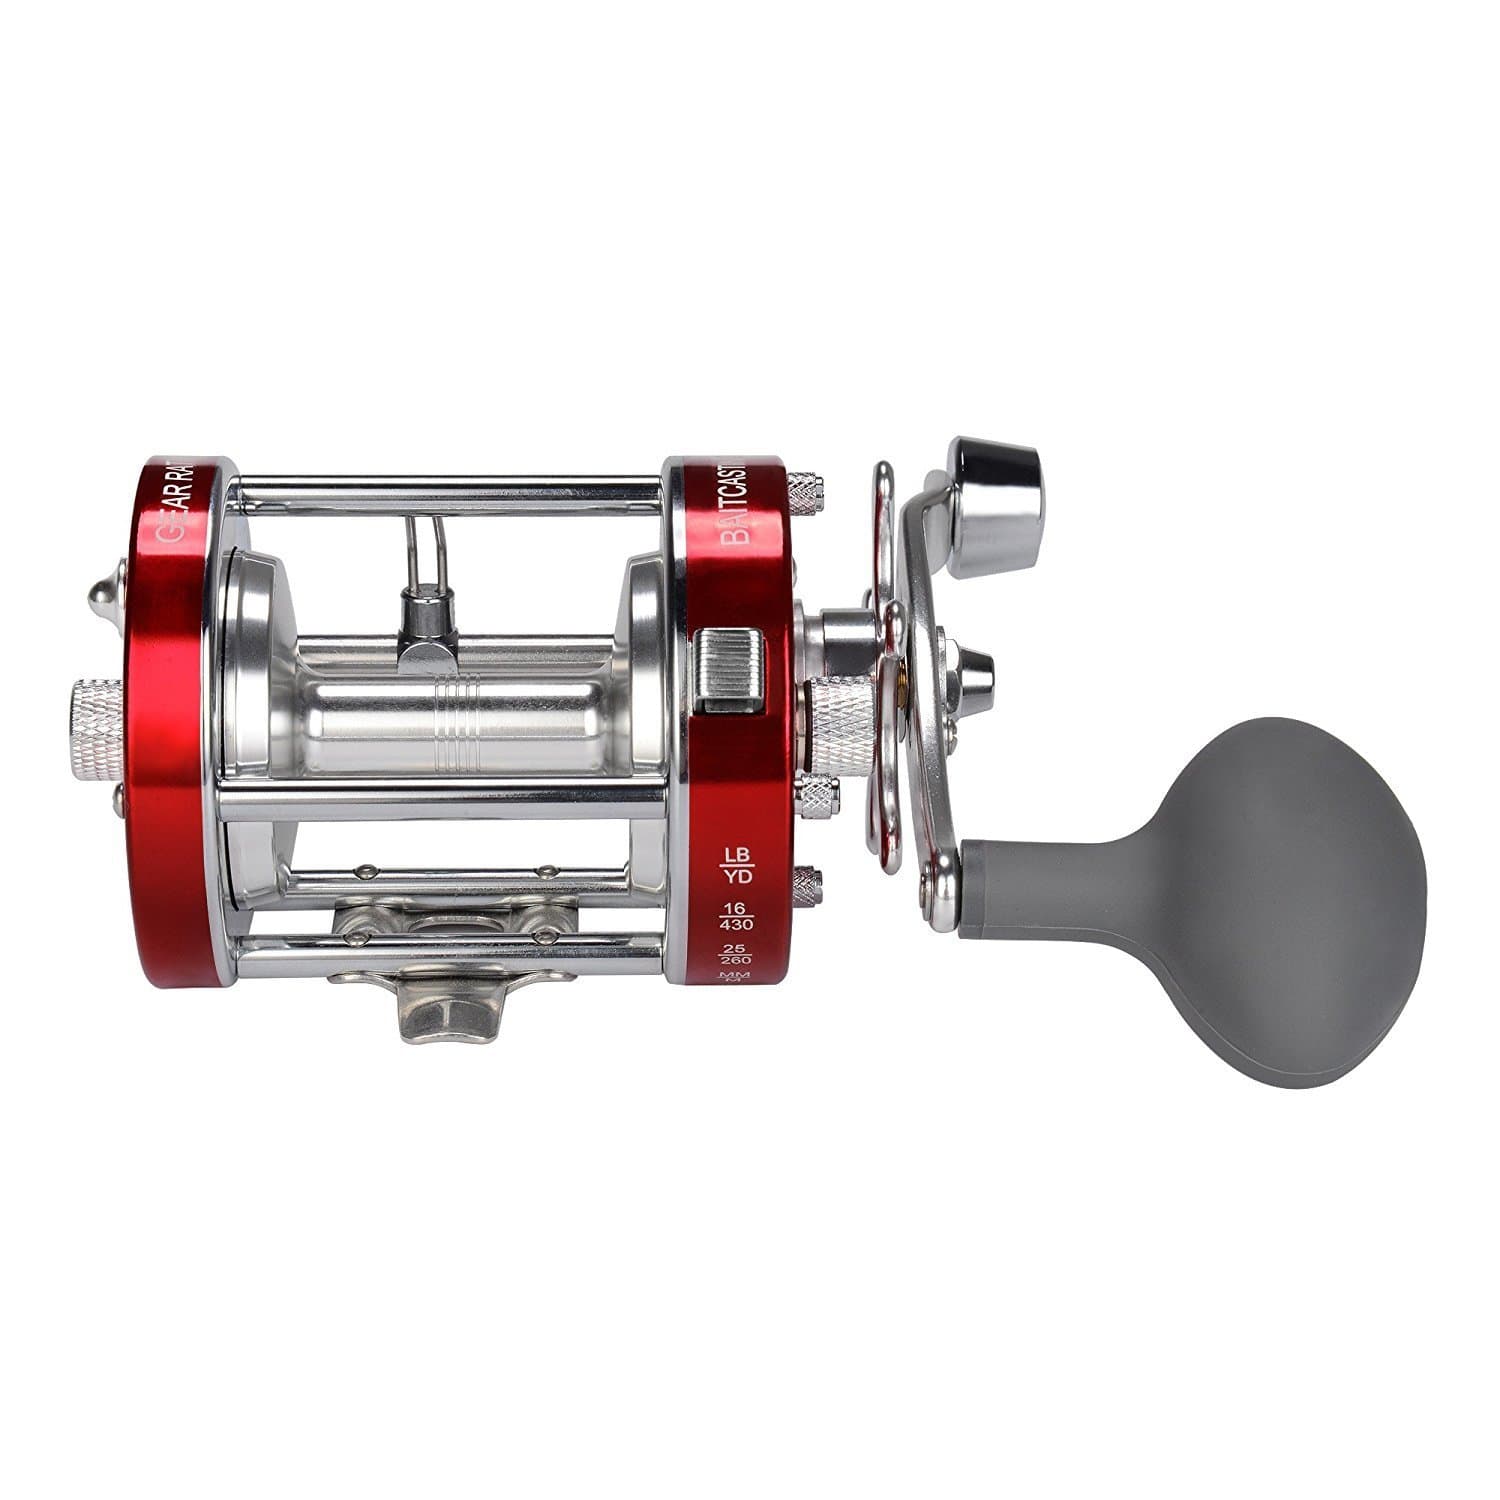 KastKing Rover50r Round Baitcasting Reel - 1 Time for sale online